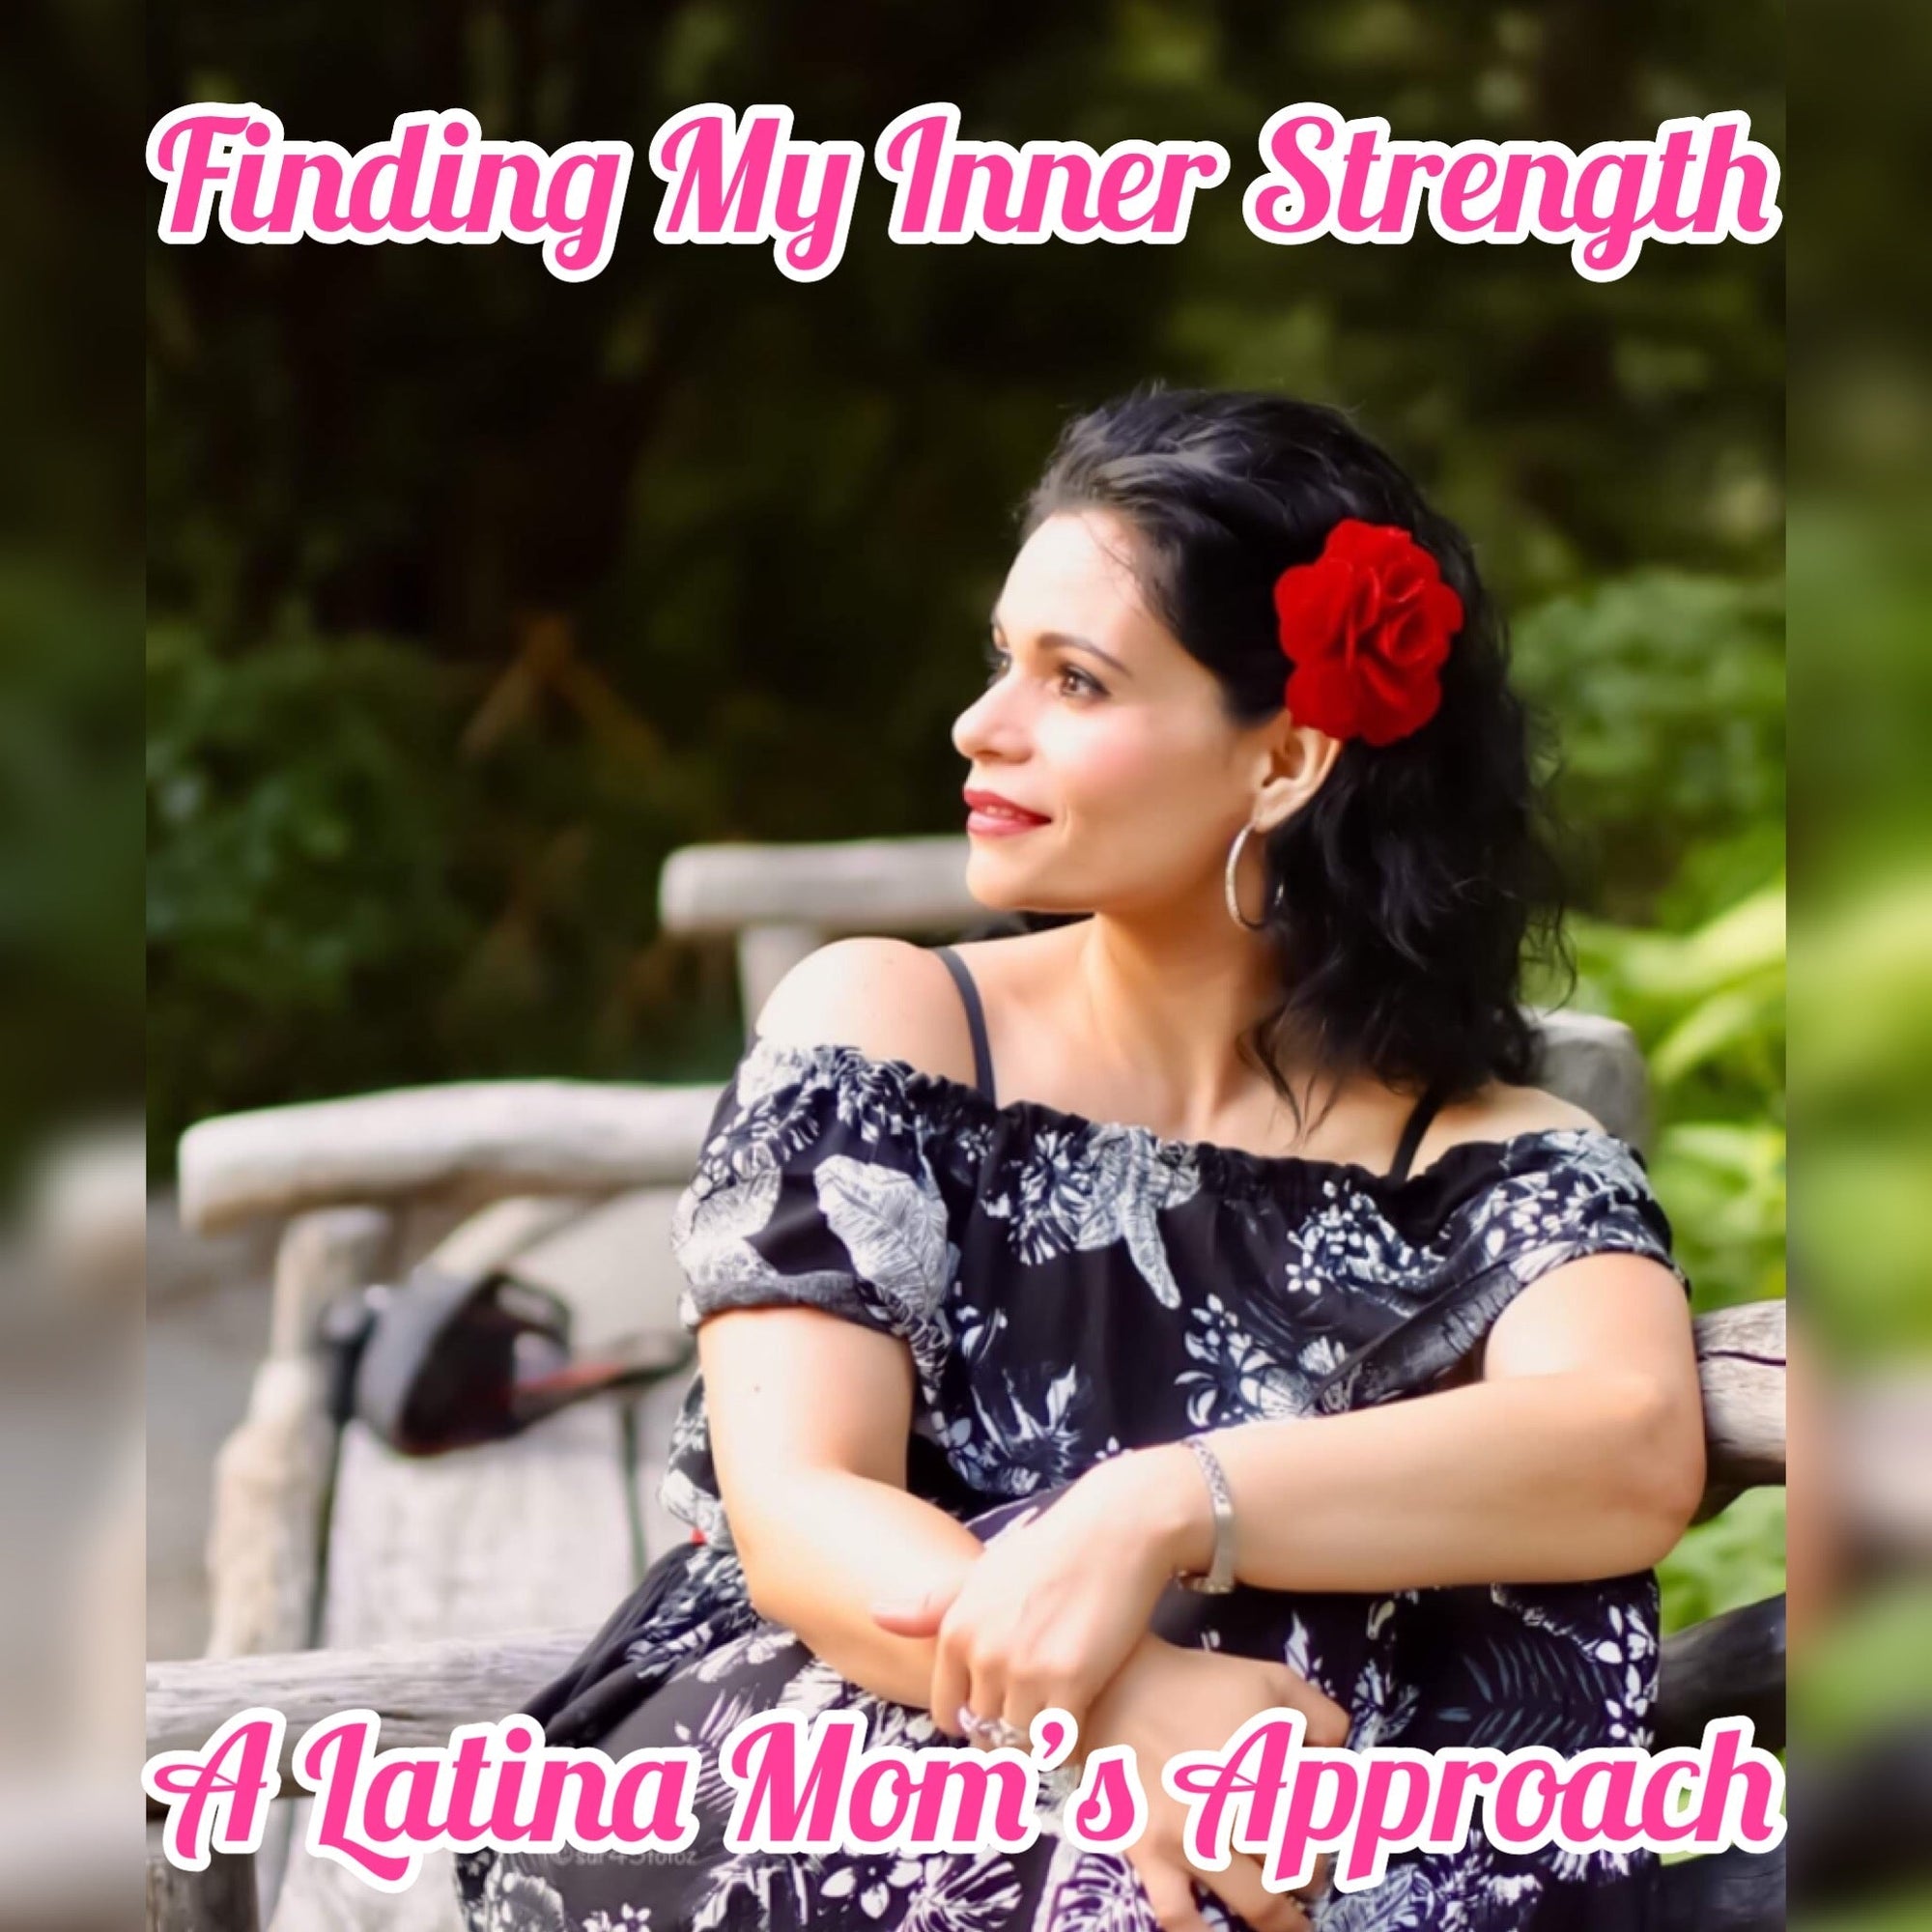 Finding My Inner Strength, A Latina Mom’s Approach When Life Gets Messy - Mi LegaSi